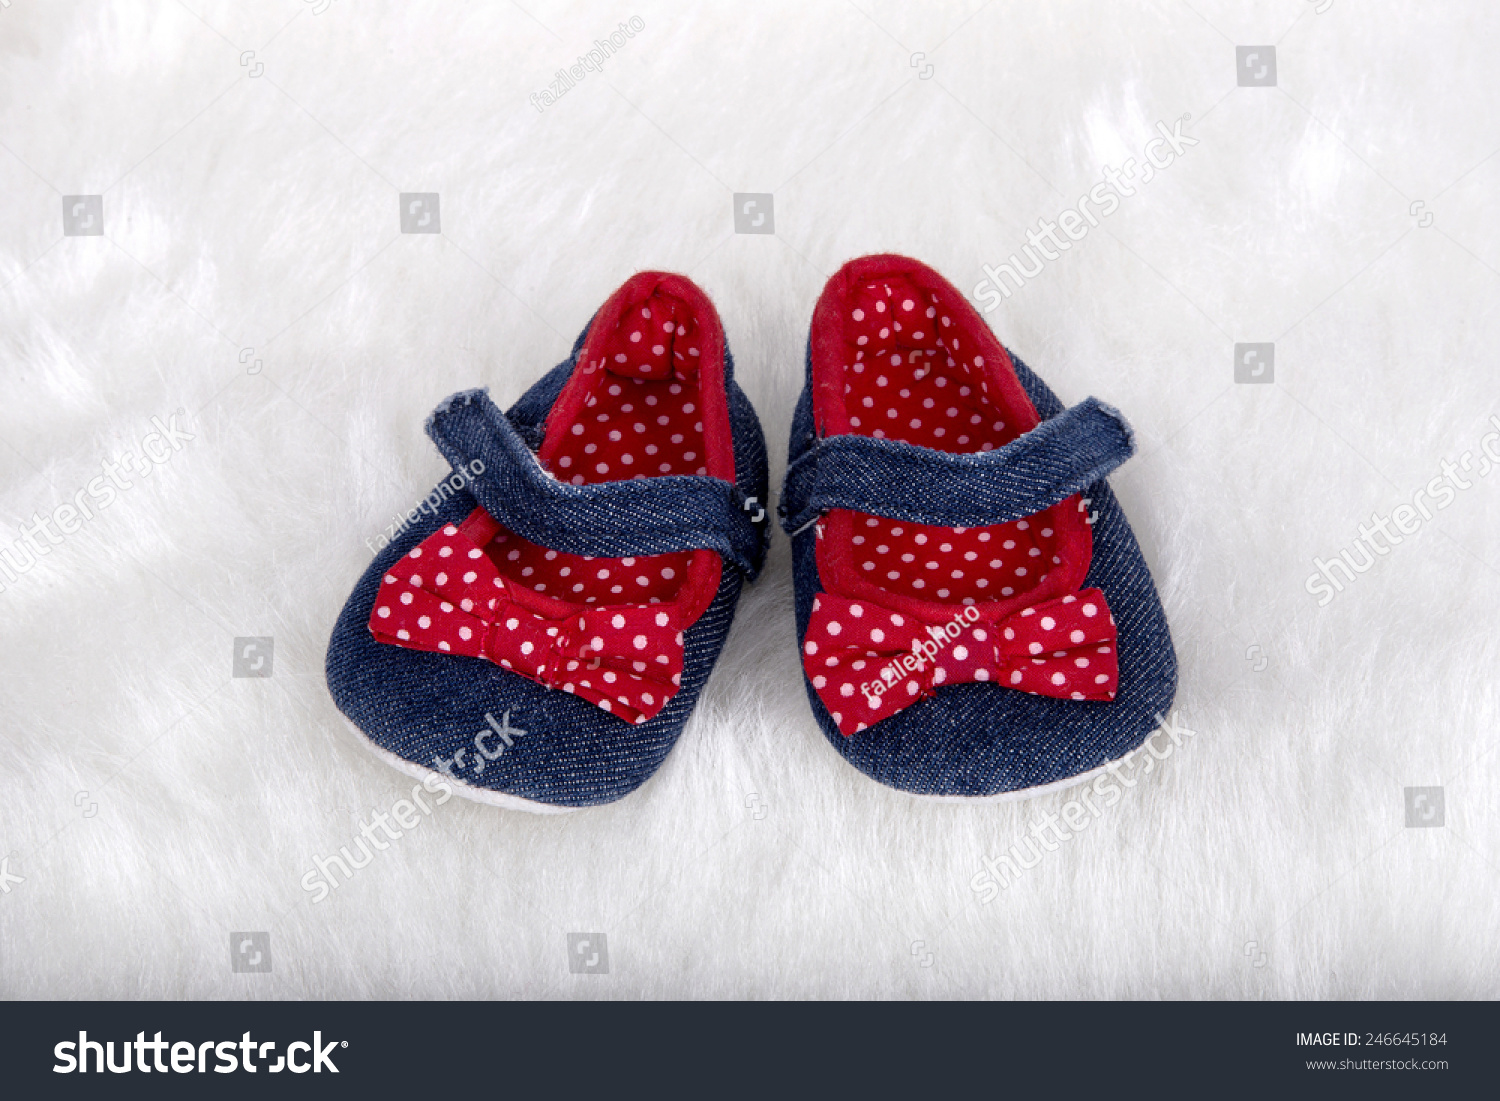 baby shoes images free download